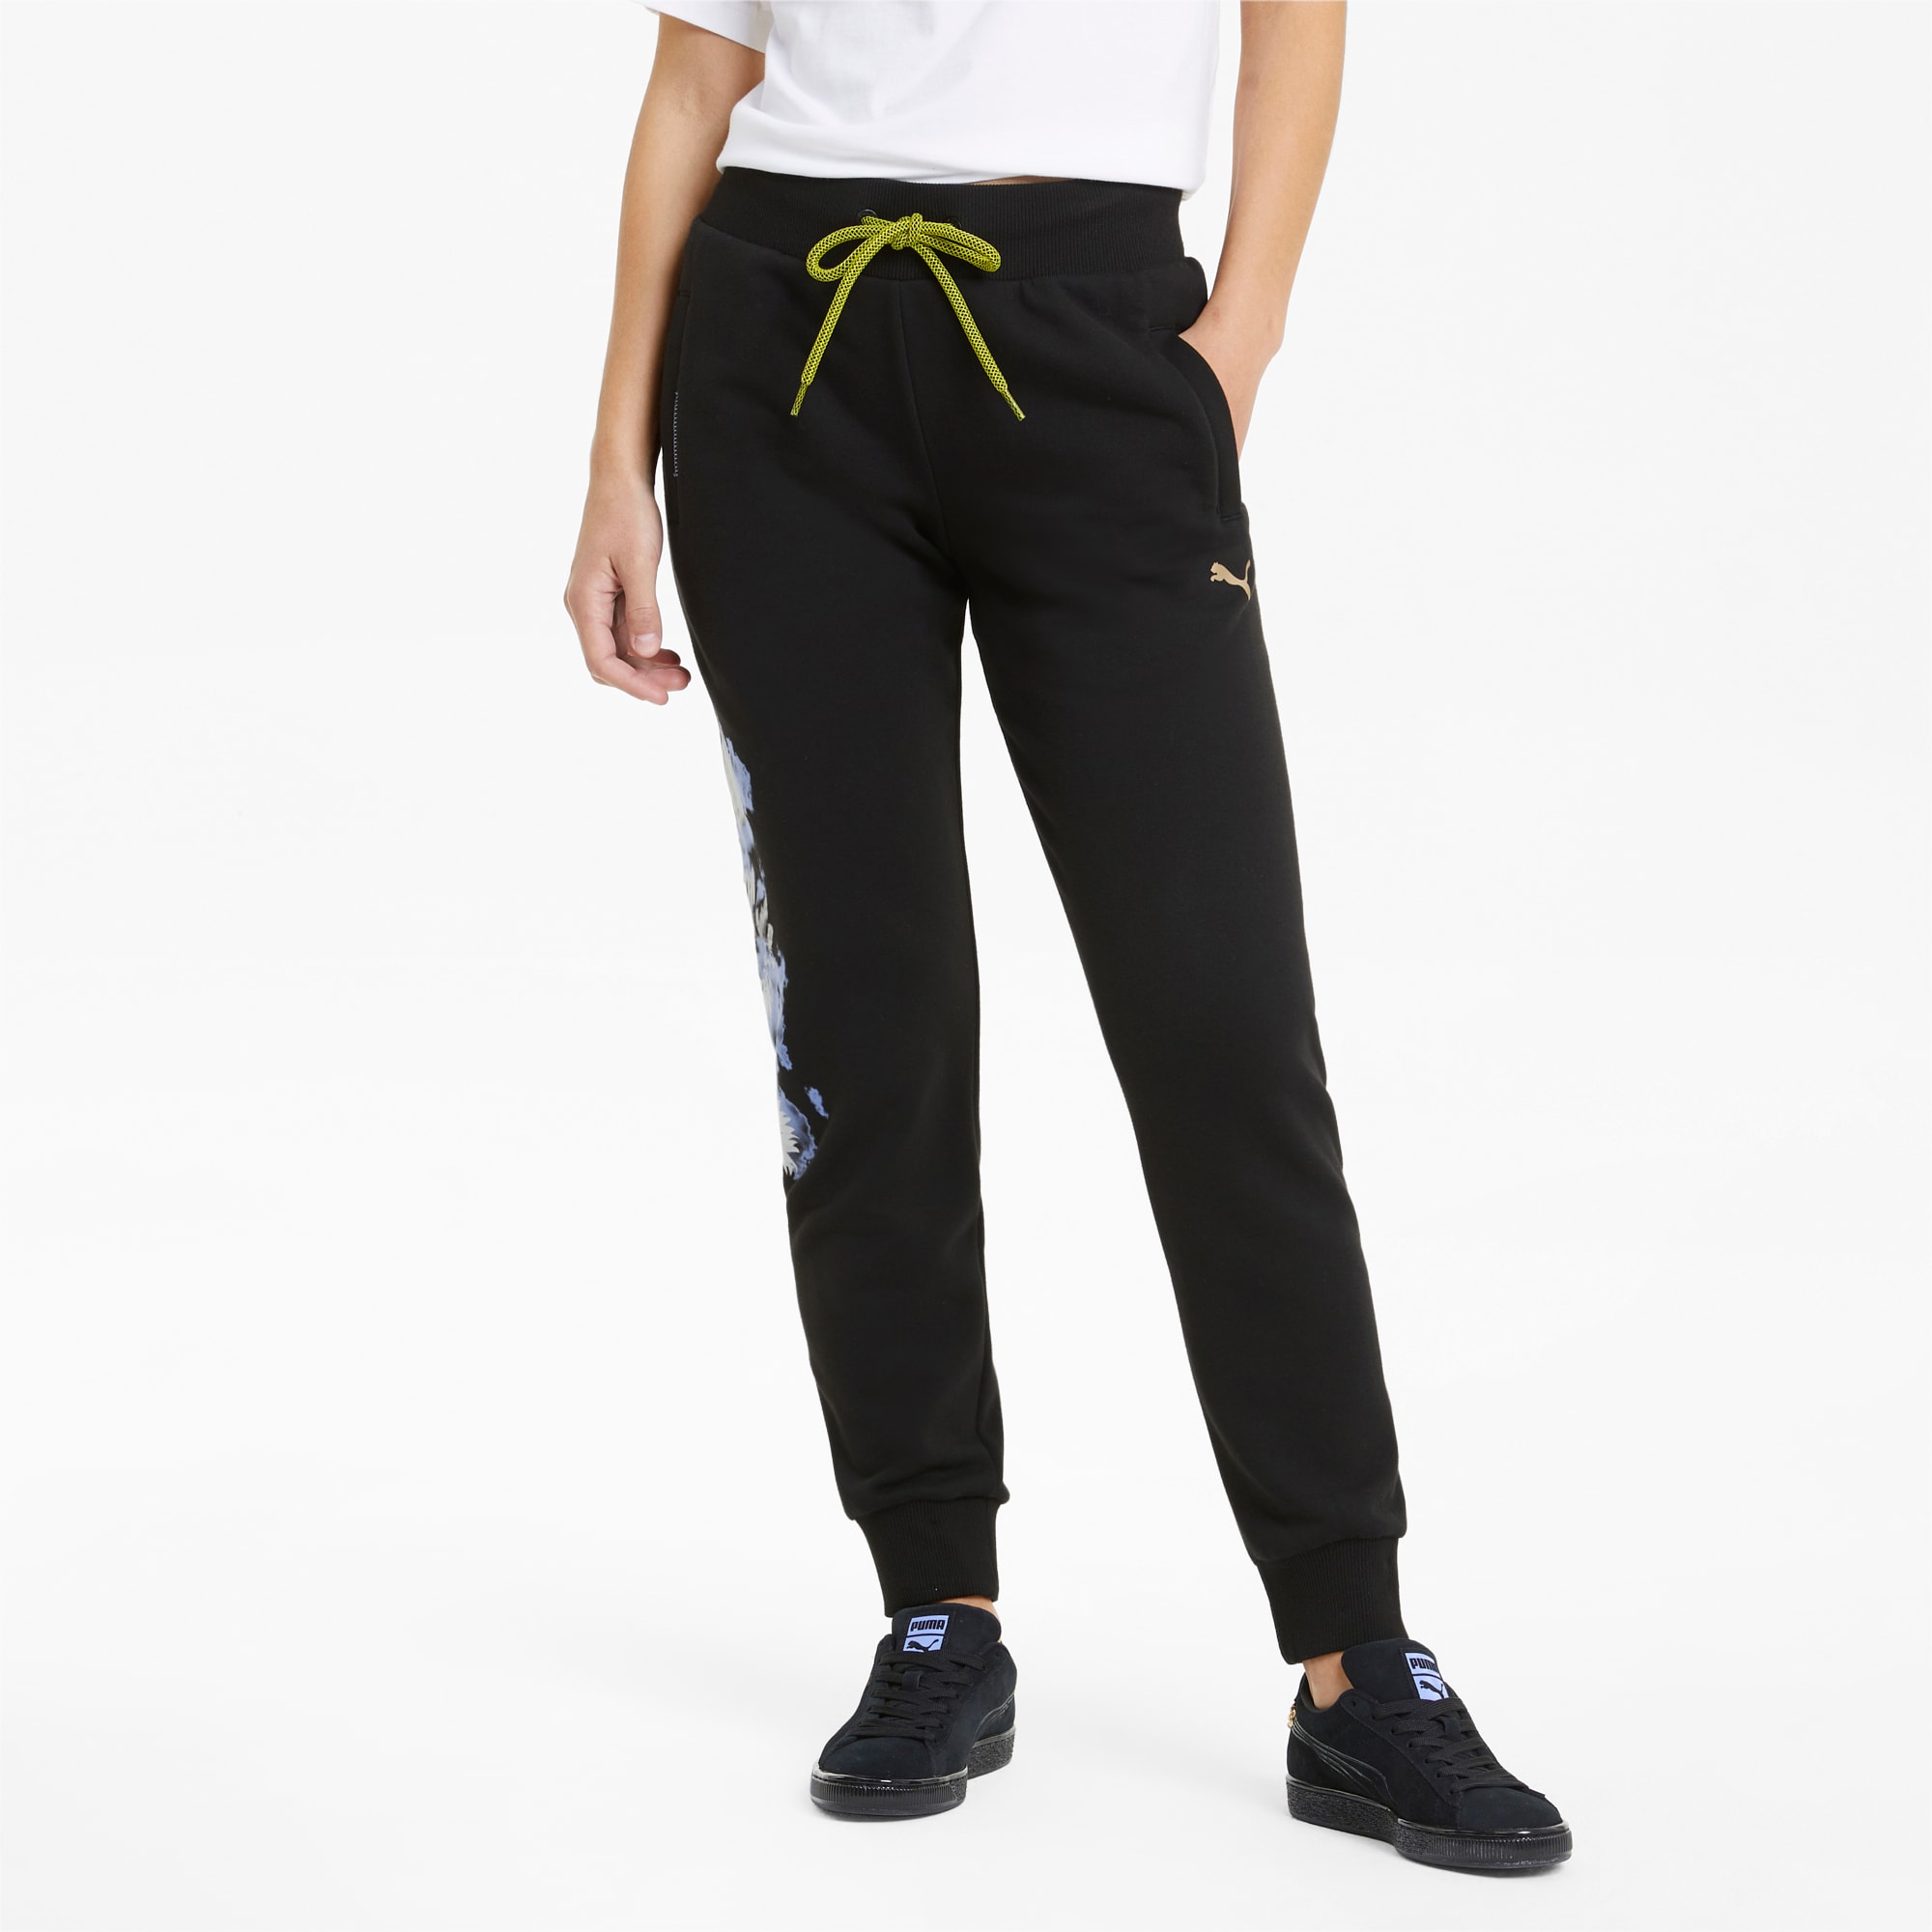 District Concept Store - PUMA International Track Pants for Women - Gray  Violet (531659-09)